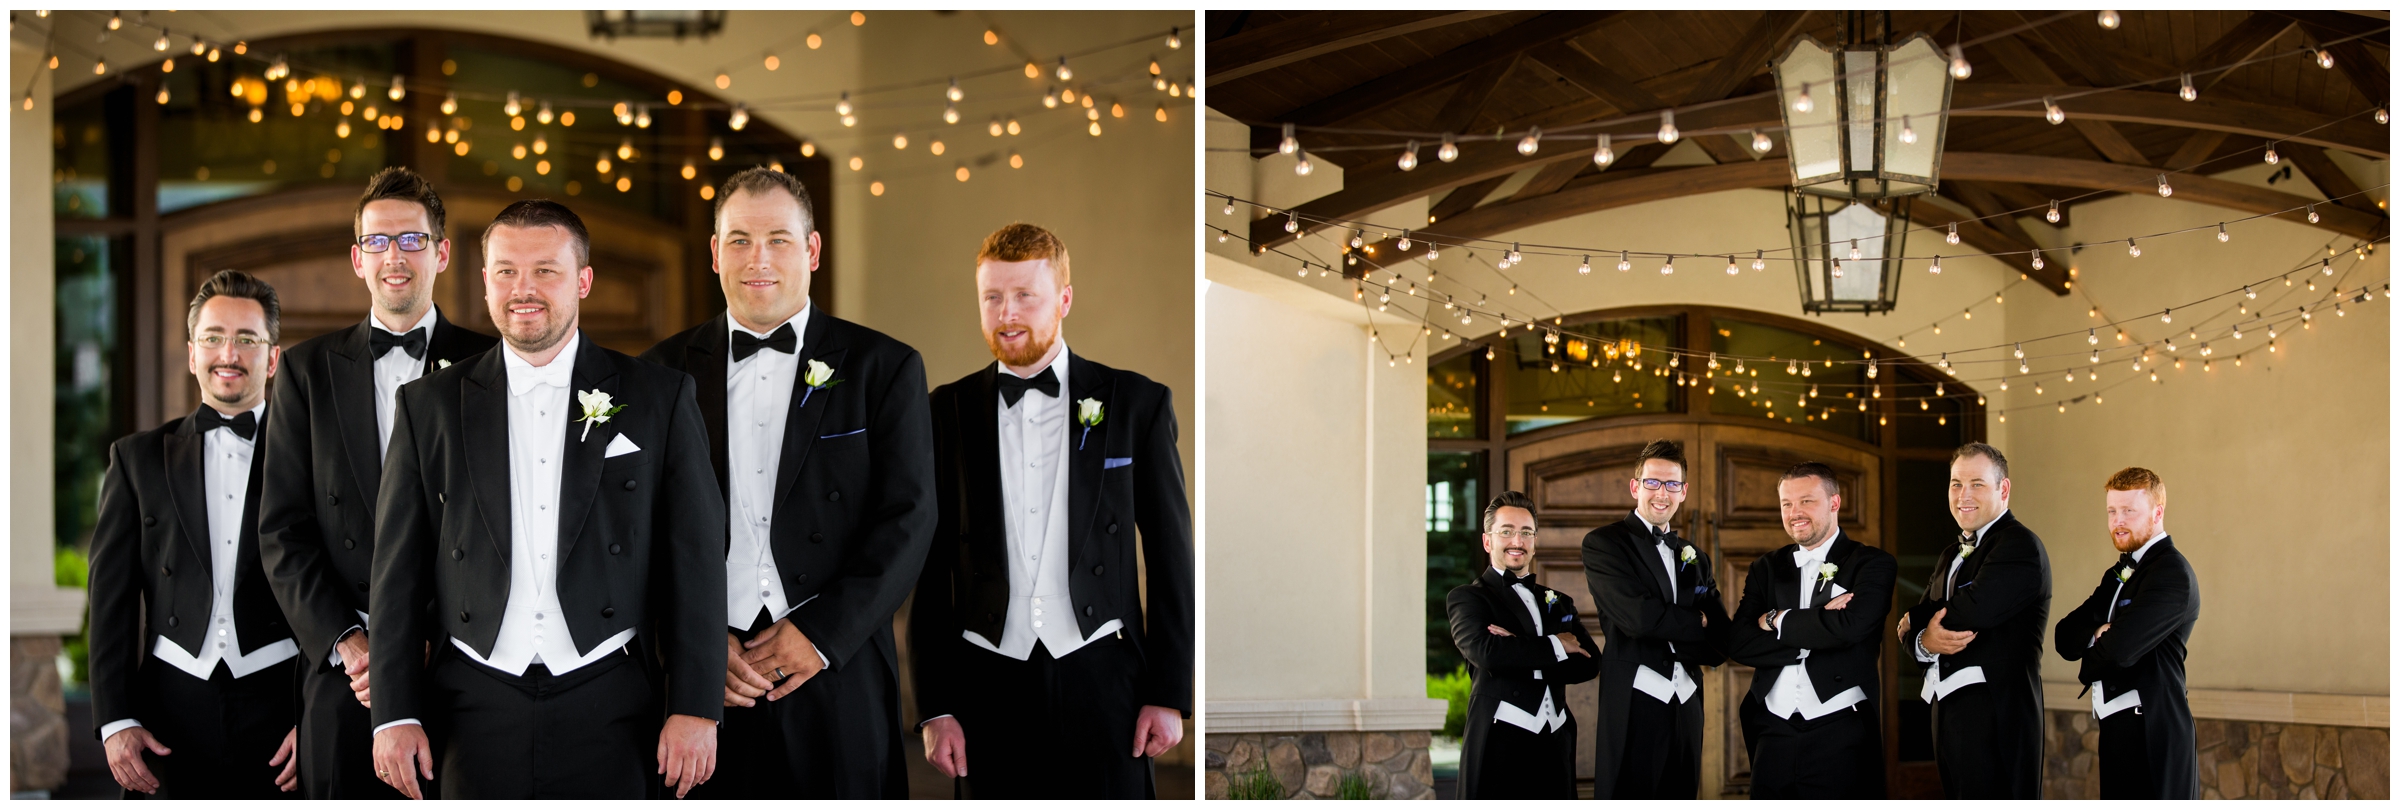 groom and groomsmen tuxes with tails at Colorado Springs wedding 